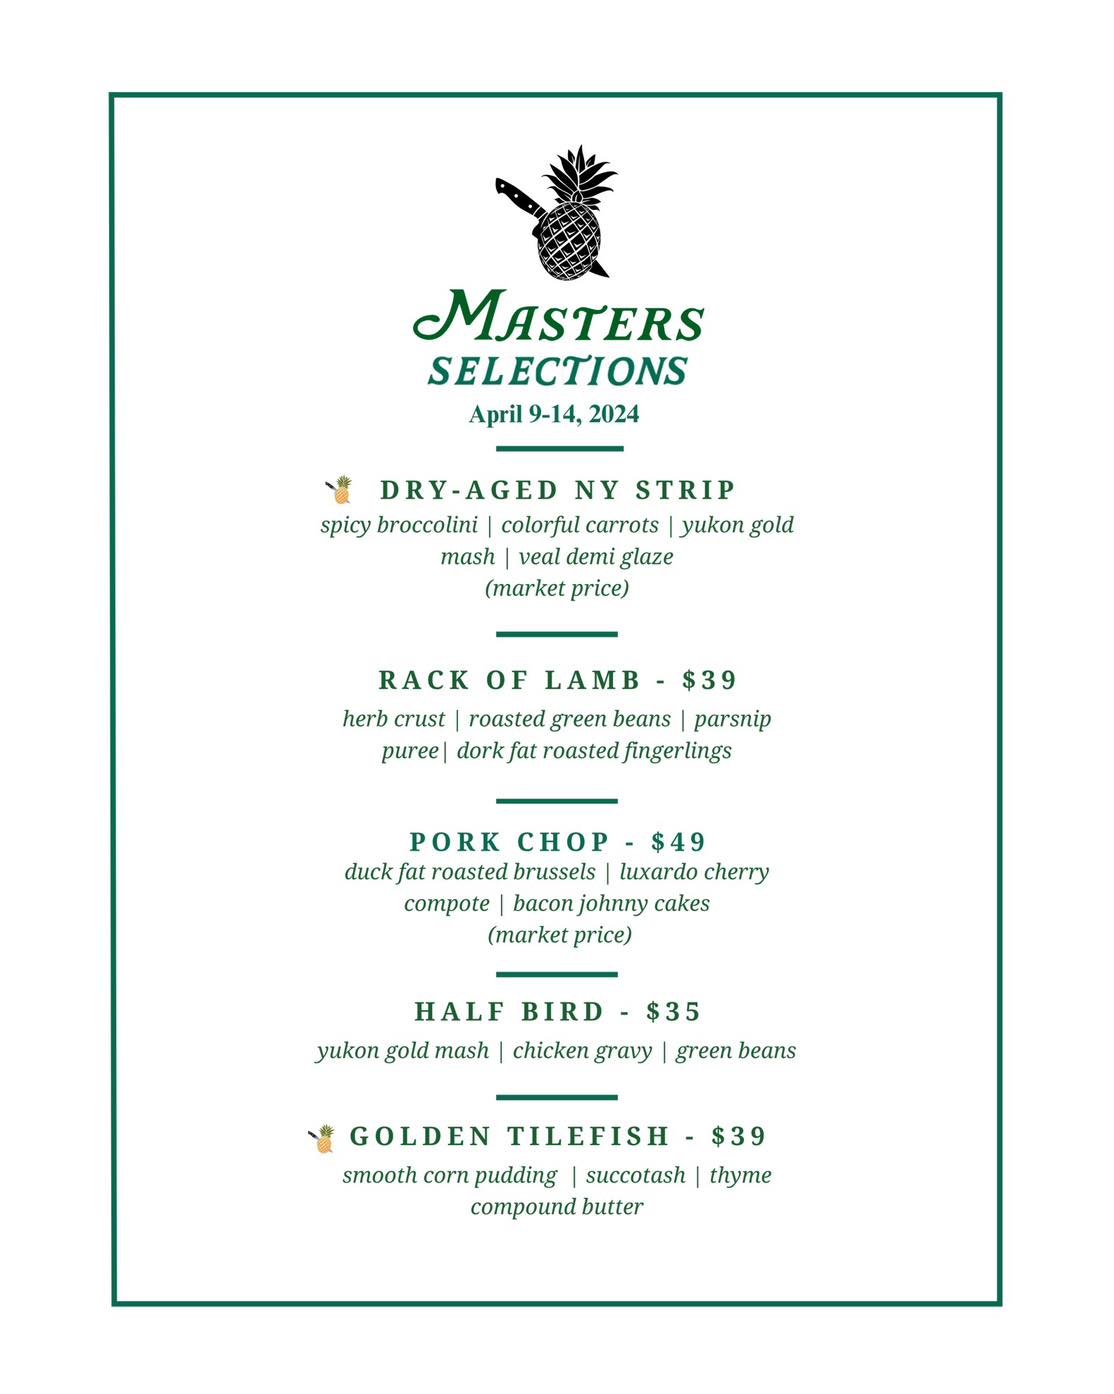 ⛳️ Masters Week is in full swing at Pineapple Ink Tavern! 🍍 Indulge in our exclusive Steakhouse Menu featuring prime cuts. Pair your meal with our Masters-inspired cocktails, including the refreshing Azalea. Join us for a week of culinary excellence